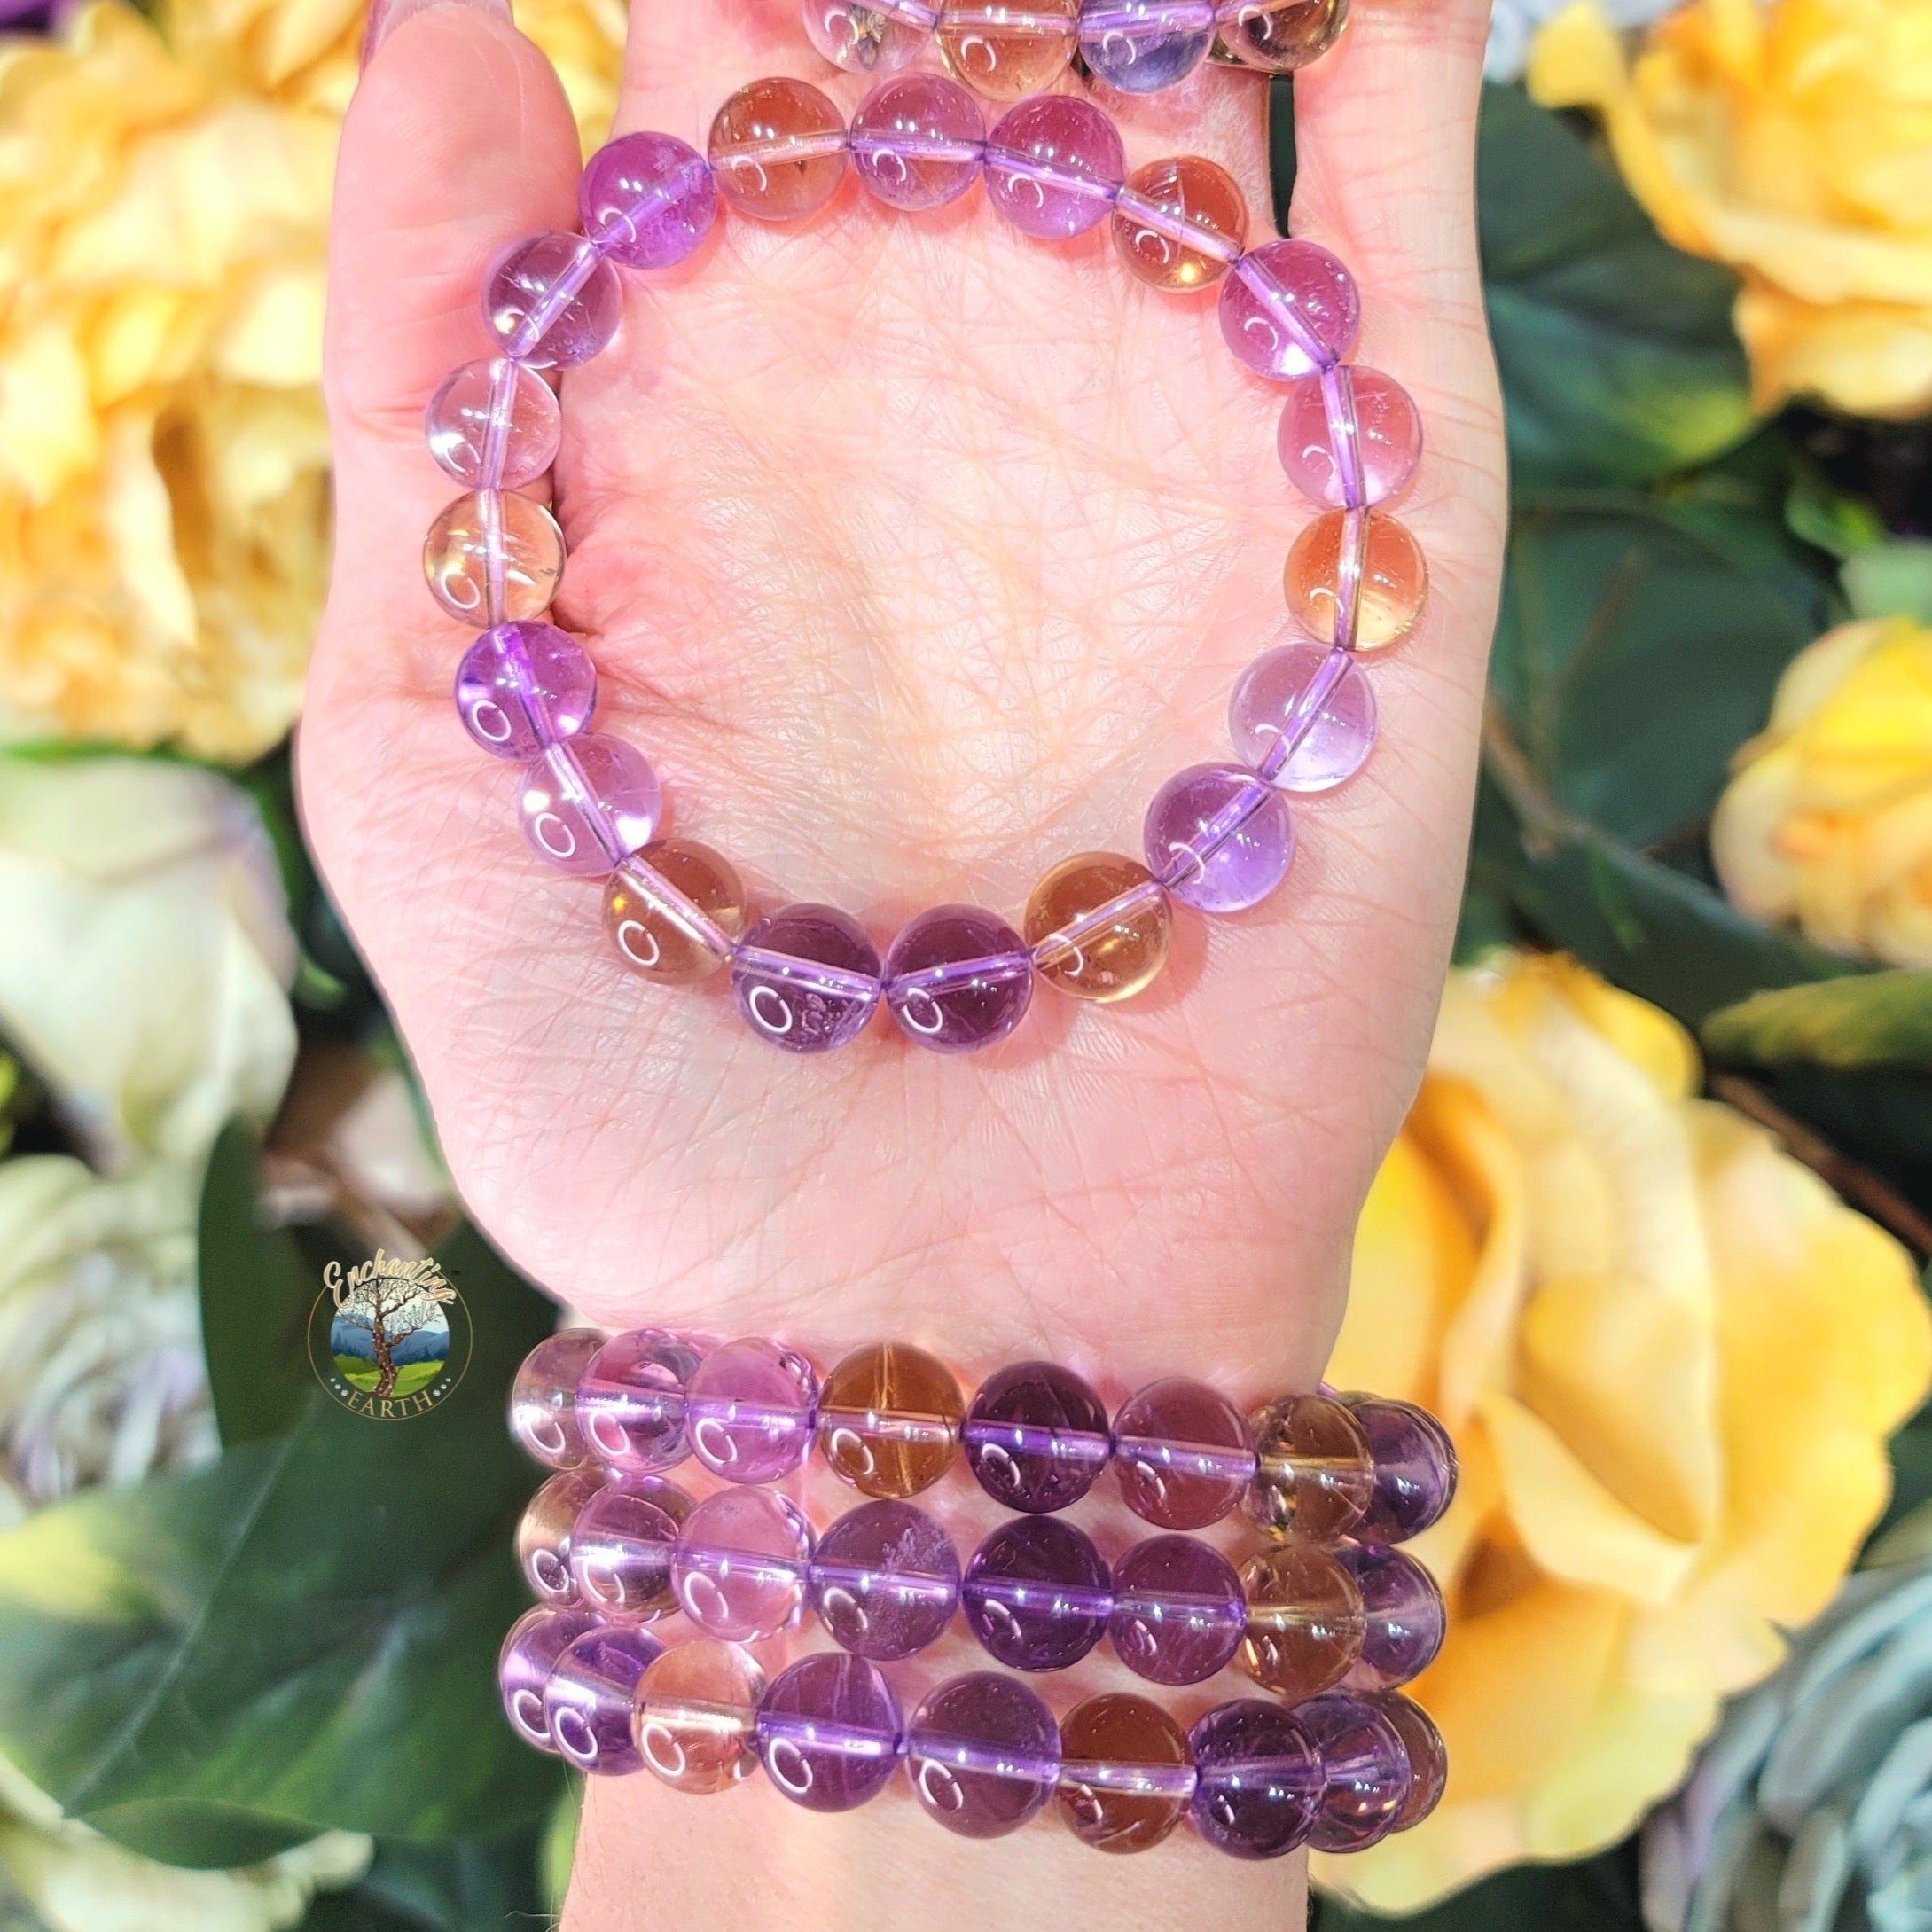 AAA Ametrine Bracelet for Action & Empowerment to Pursue Your Dreams